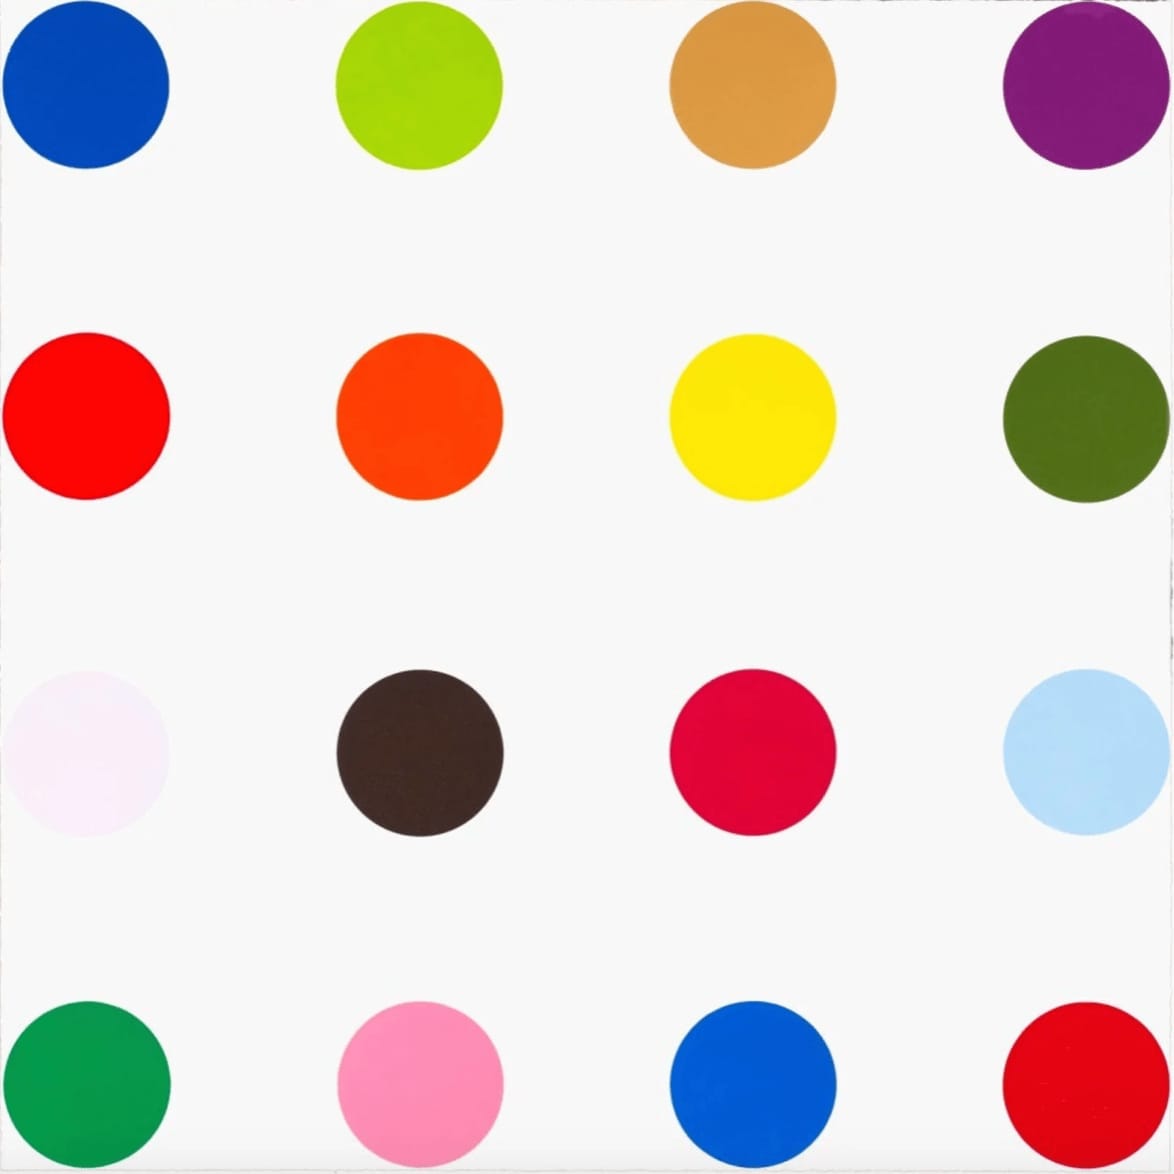 Damien Hirst, Cocarboxylase, 2010